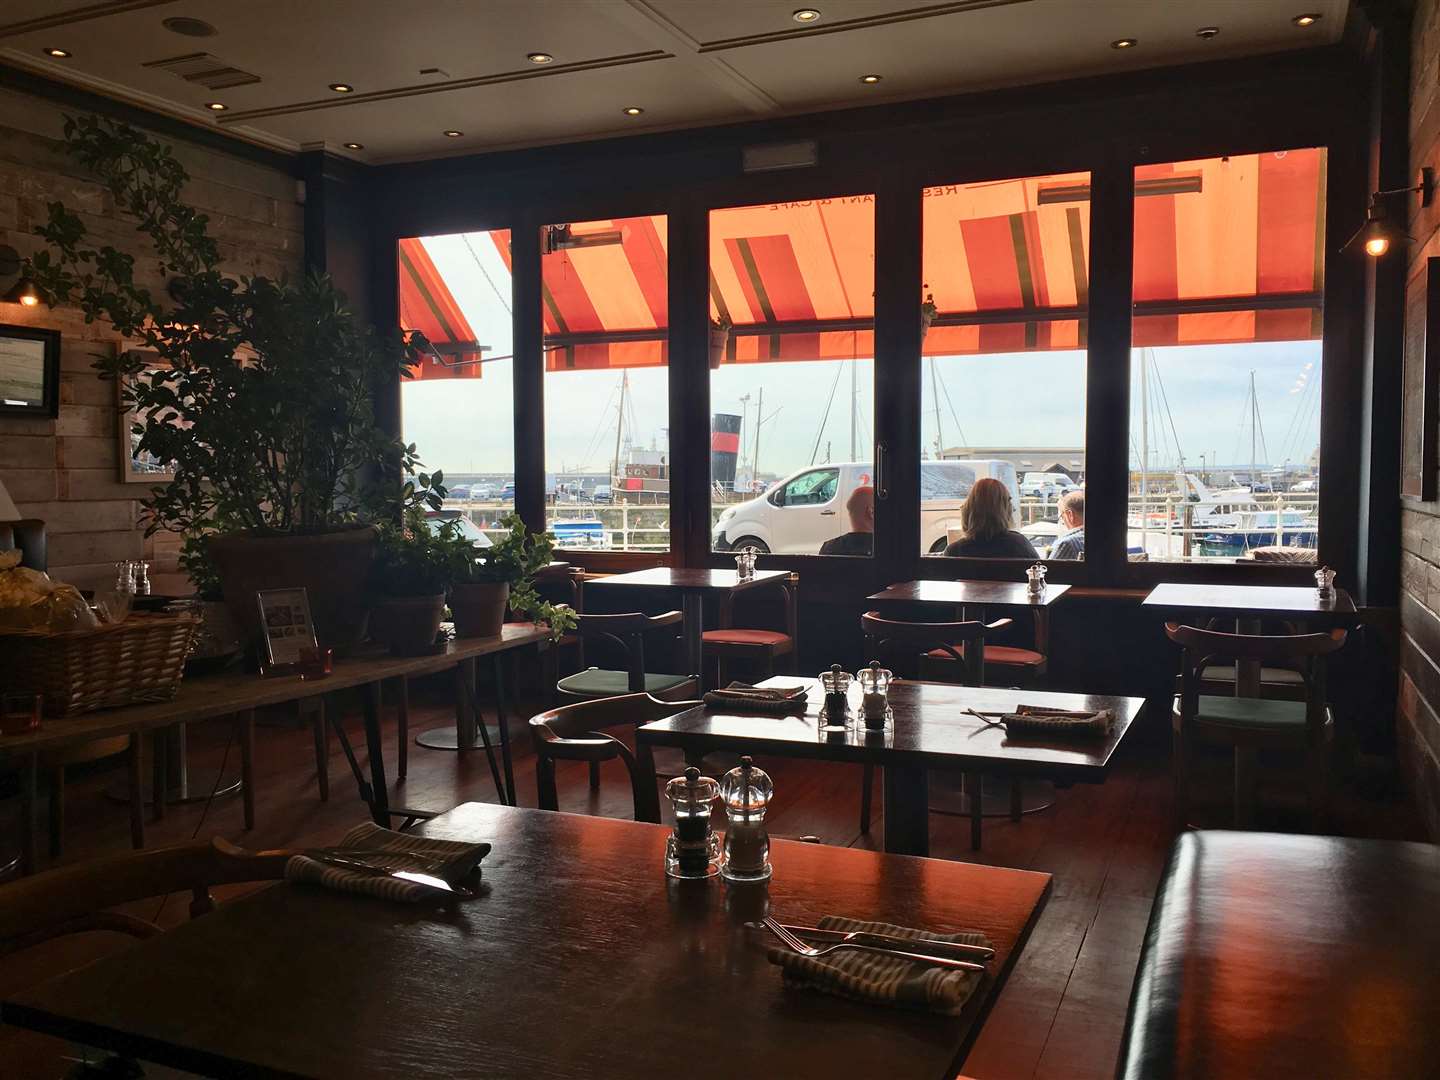 Big wide opening windows offer views across the picturesque marina at Ramsgate's Royal Harbour